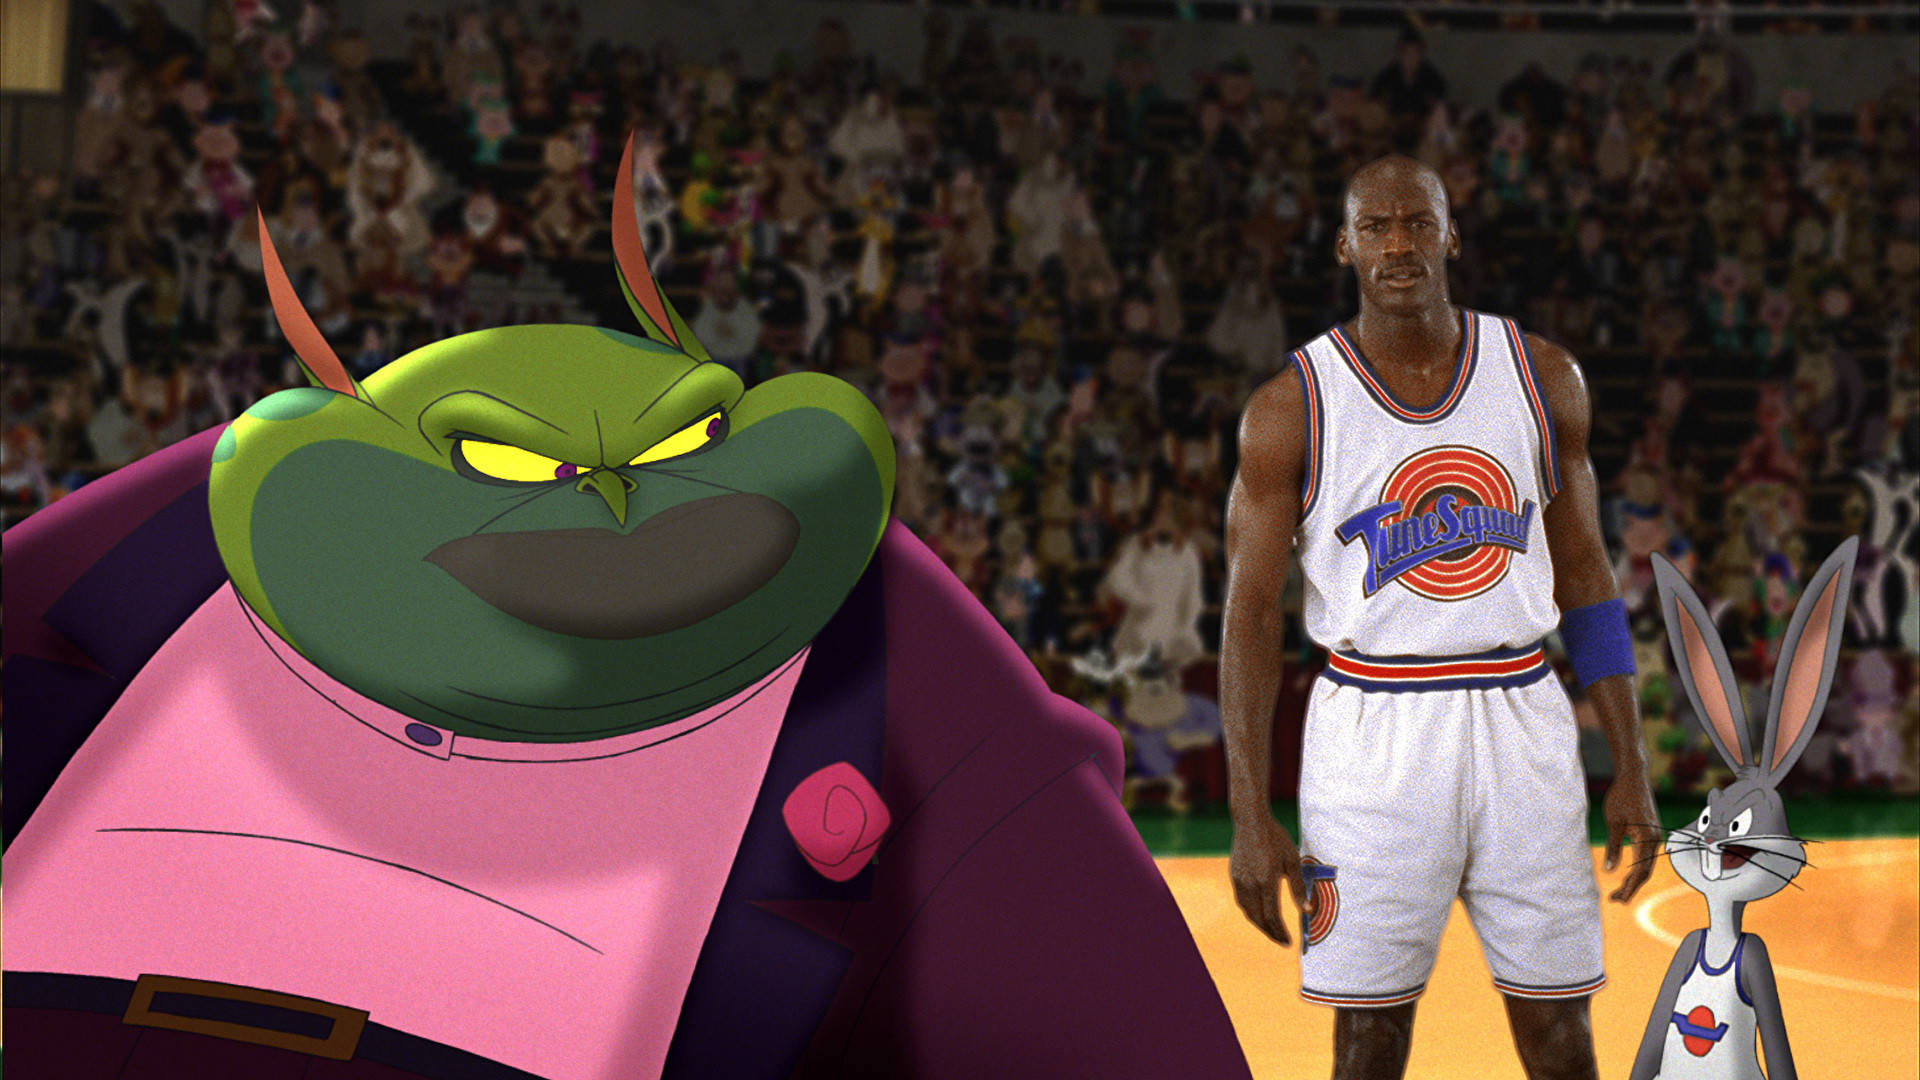 Space Jam 1920X1080 Wallpaper and Background Image